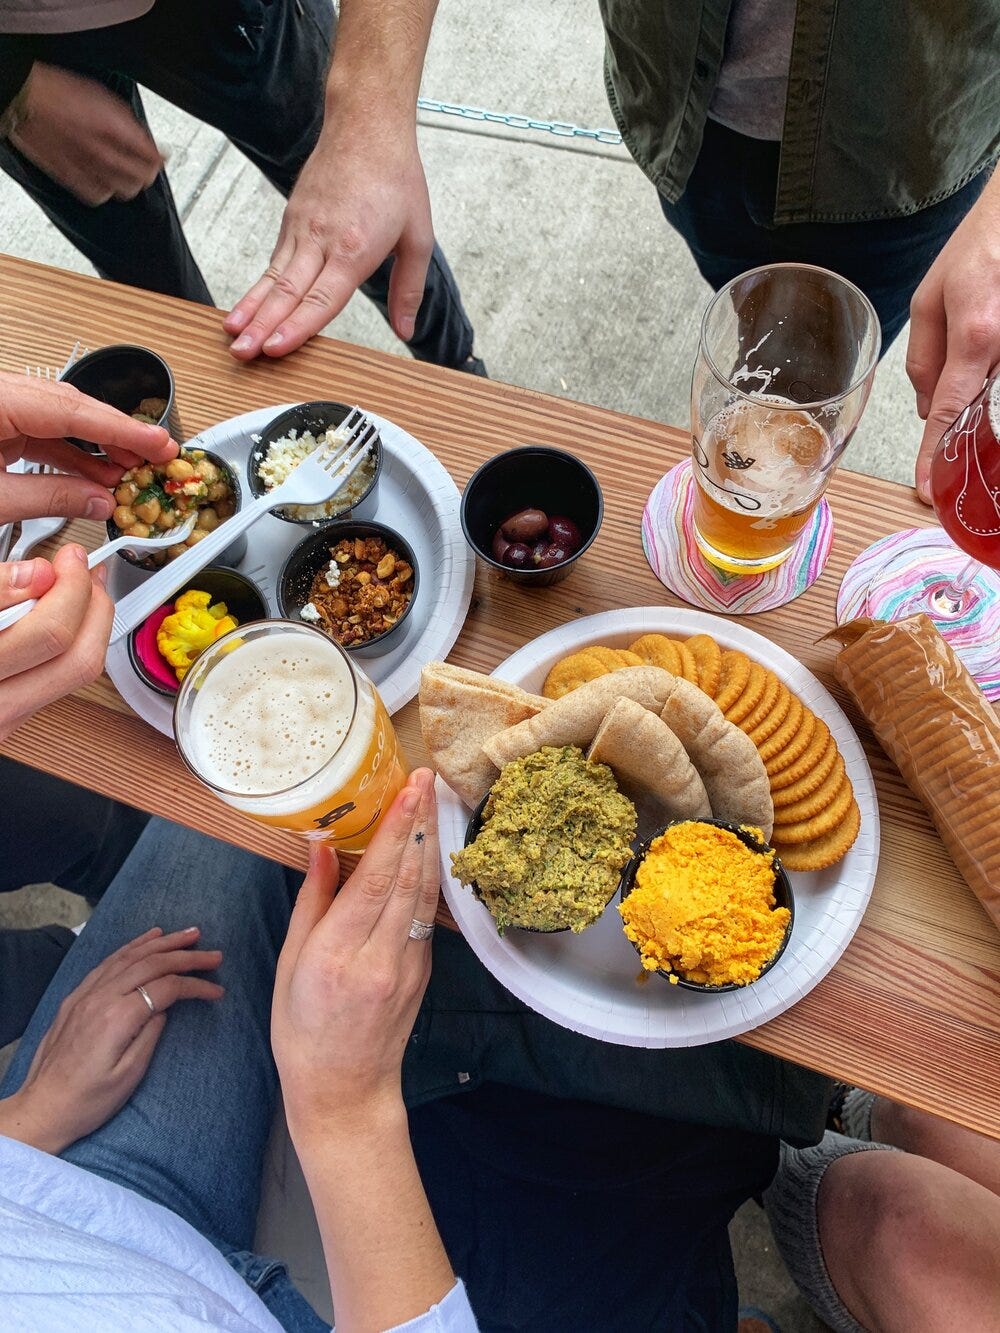 Snacks are better with friends. Full spread at Grimm from the Samesa kitchen - pistachio lentil dip and beer cheese are forever a required order - ask for extra Ritz.